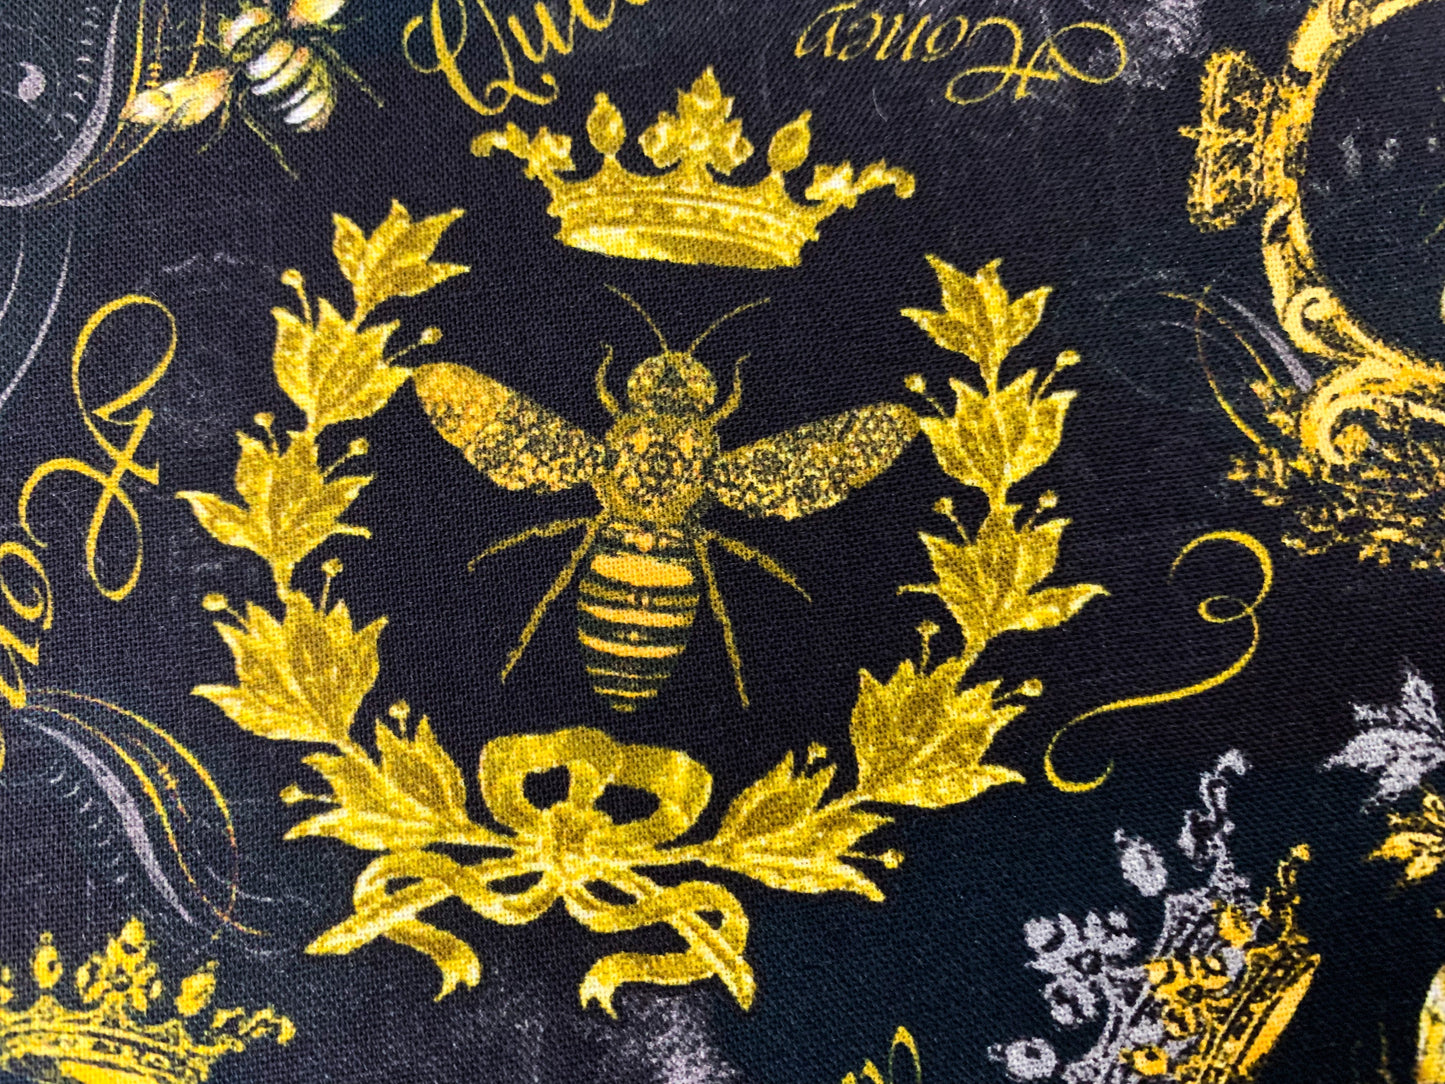 Crest Fancy Queen Bee fabric CD1355 Bumble bee fabric floral fabric